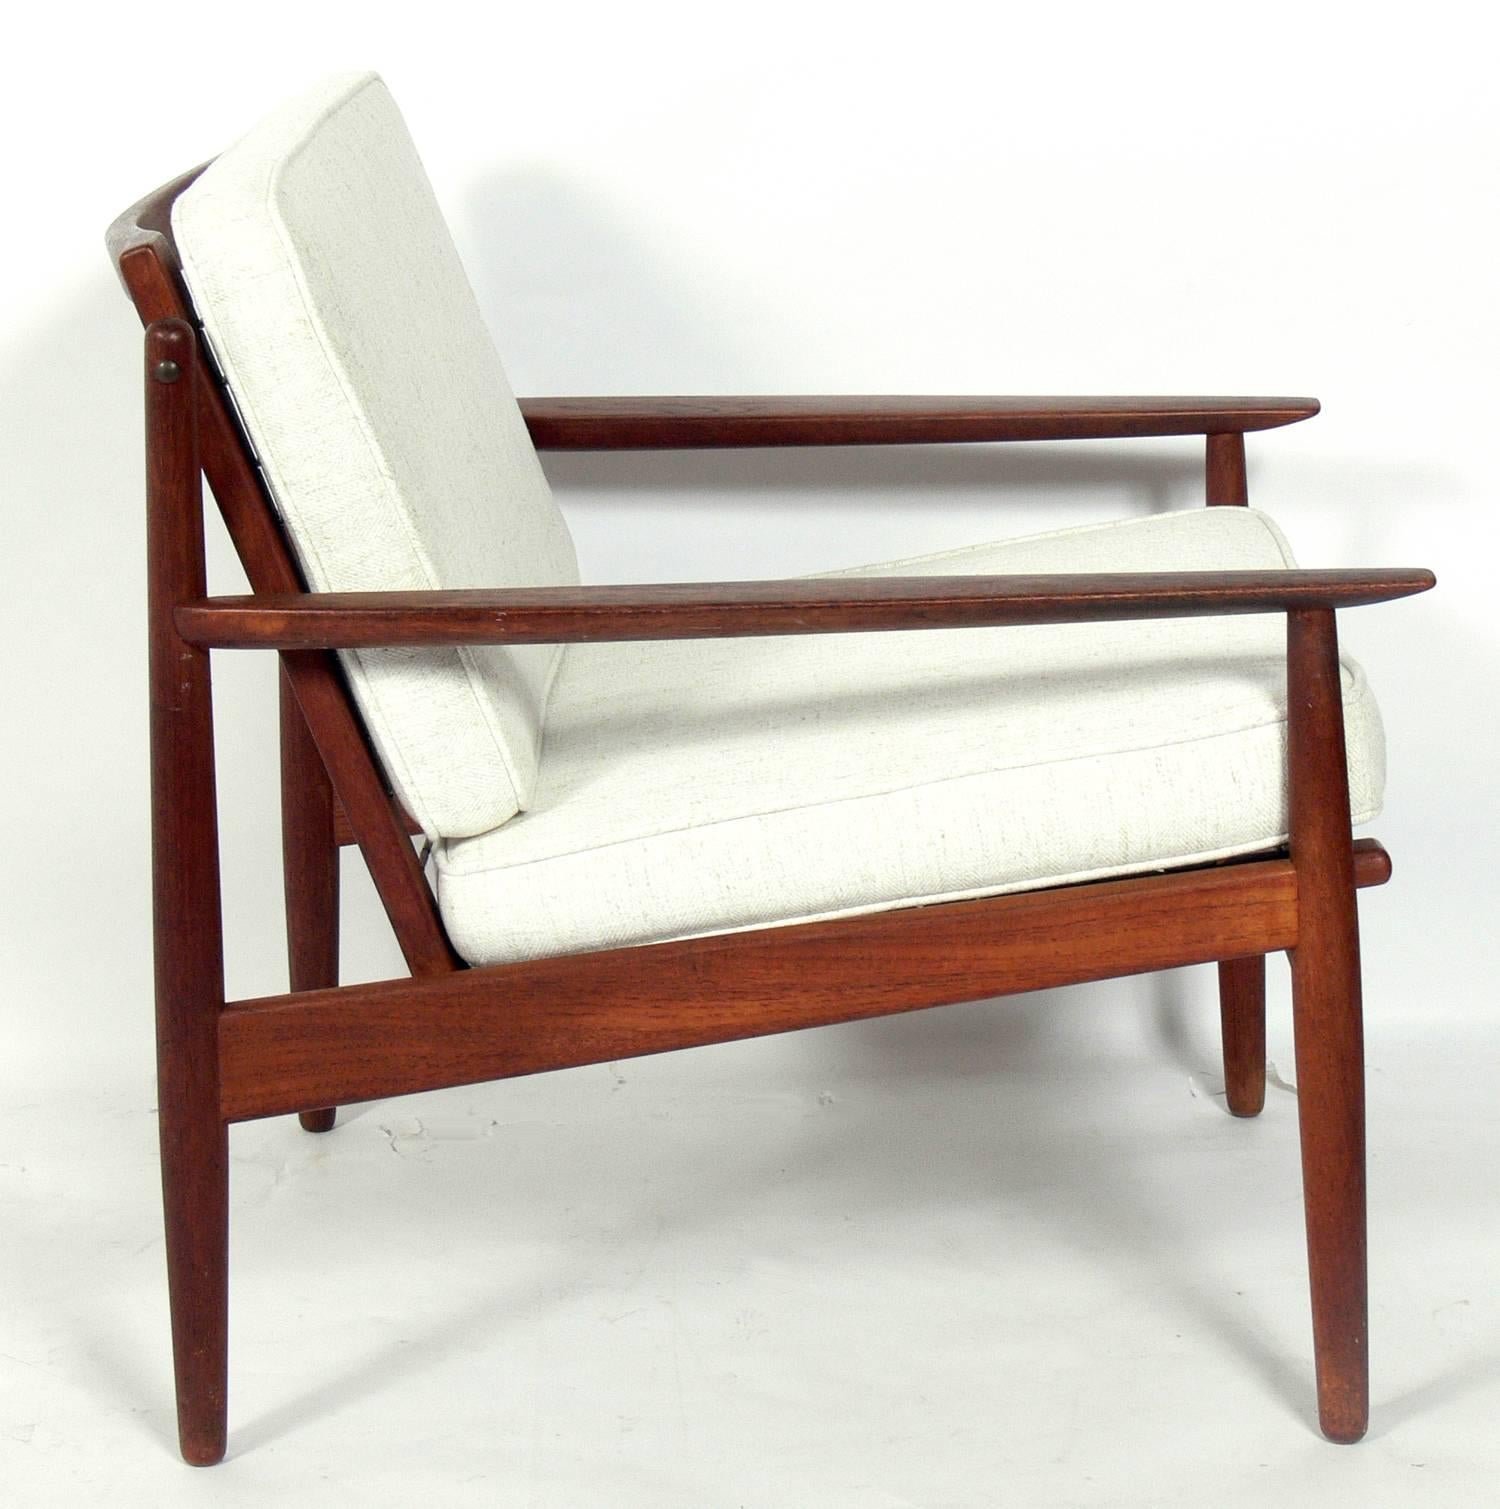 Danish Modern lounge chair, designed by Arne Vodder for Glostrup Mobelfabrik, Denmark, circa 1950s. Signed with Glostrup label. The teak frame has been cleaned and Danish oiled and reupholstered in an ivory color herringbone fabric.